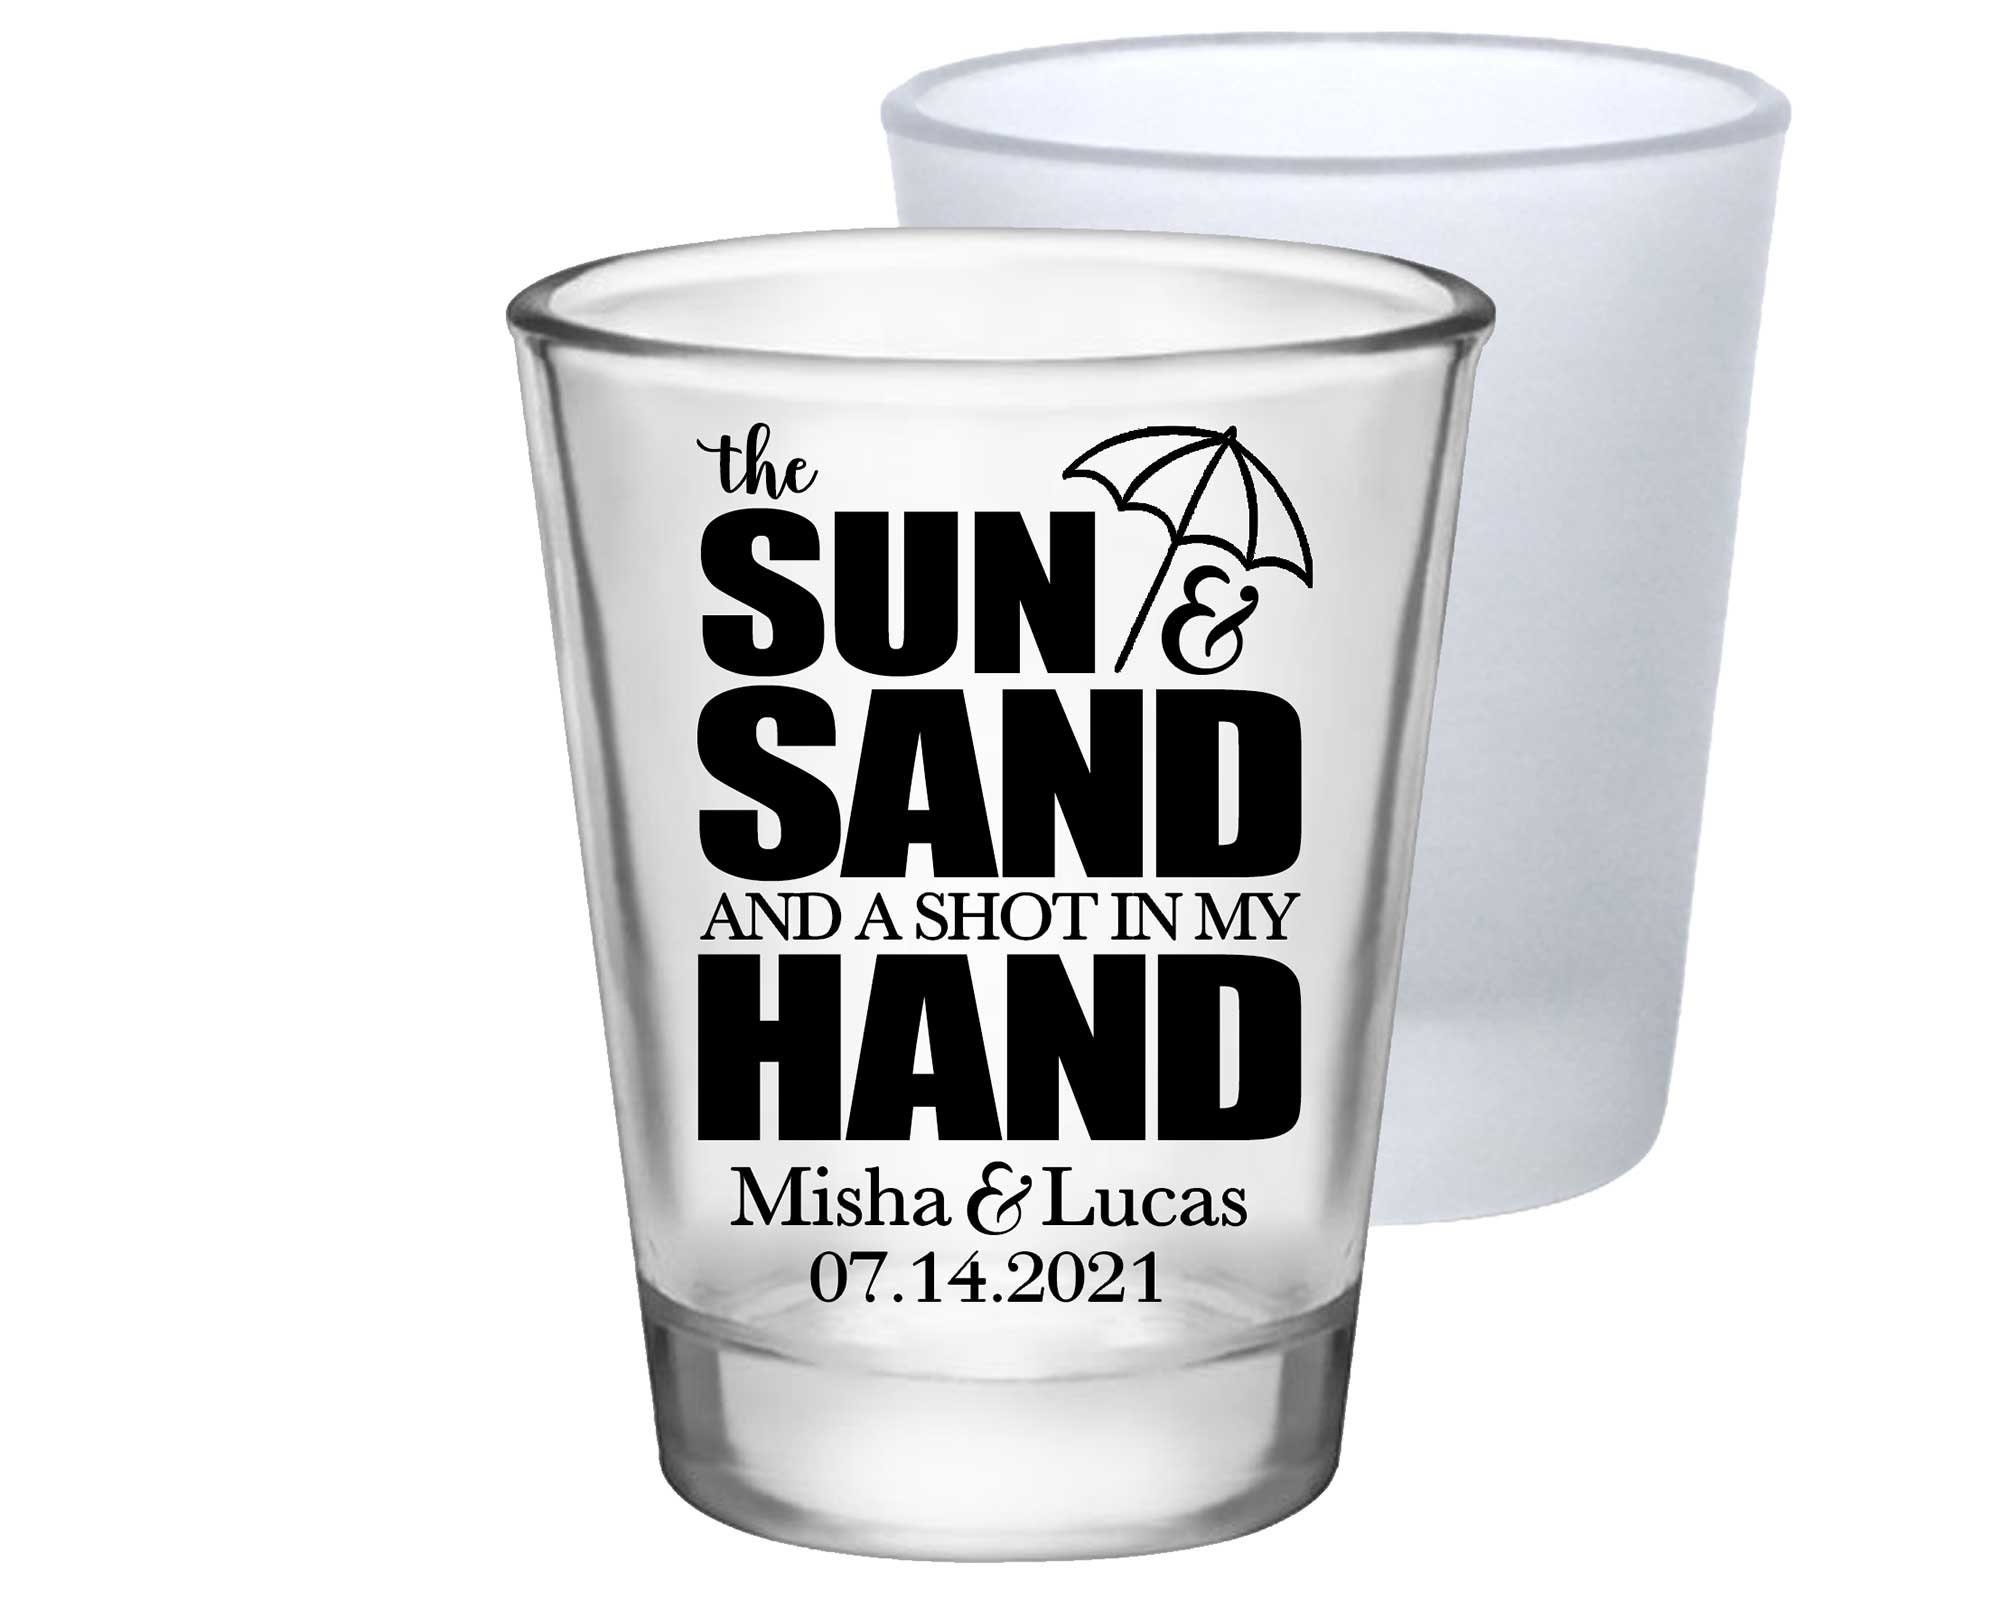 Wedding Shot Glasses For Guests Beach Favors Clear Or Frosted Decor The Sun & Sand in My Hand 1A